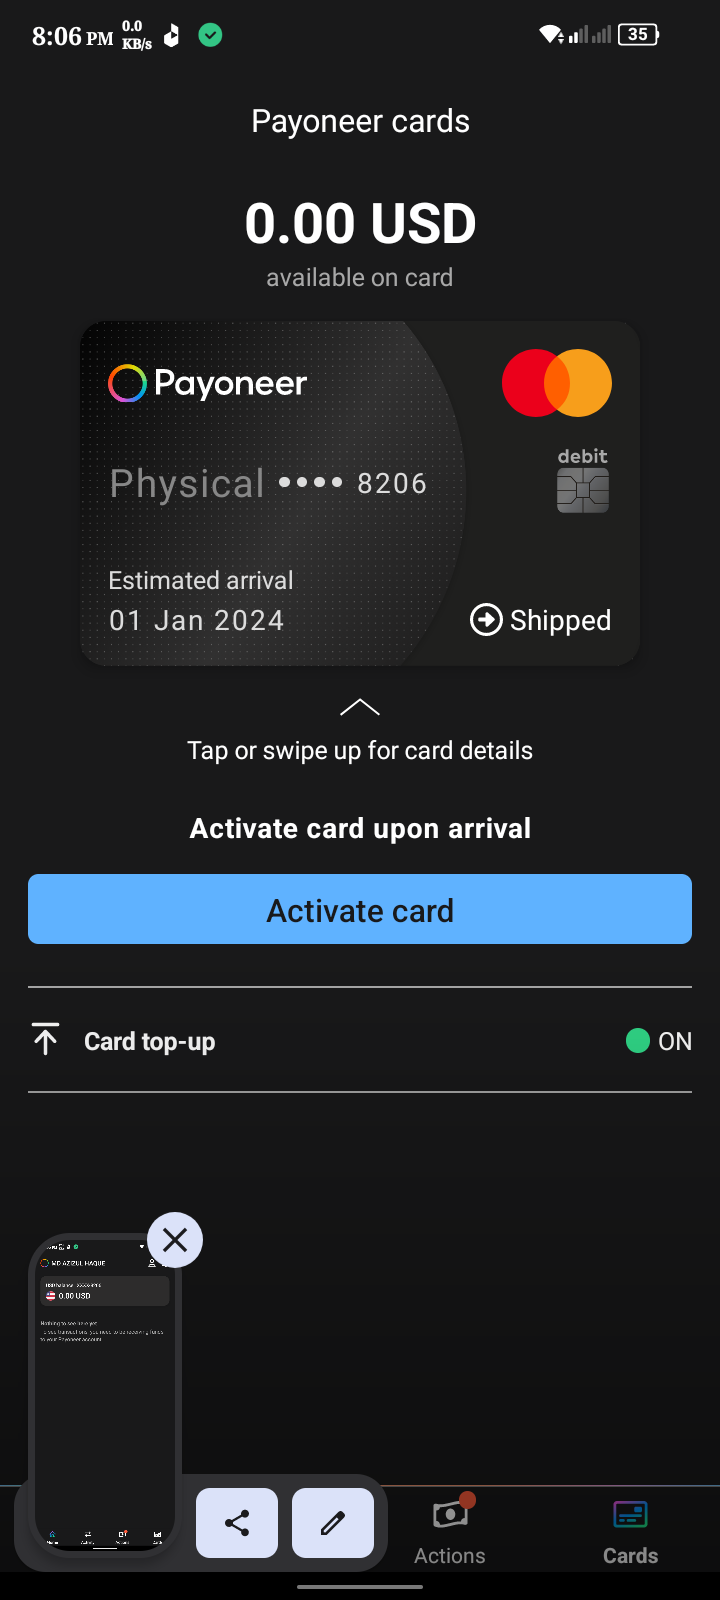 135580Paynoeer card order Account Approval